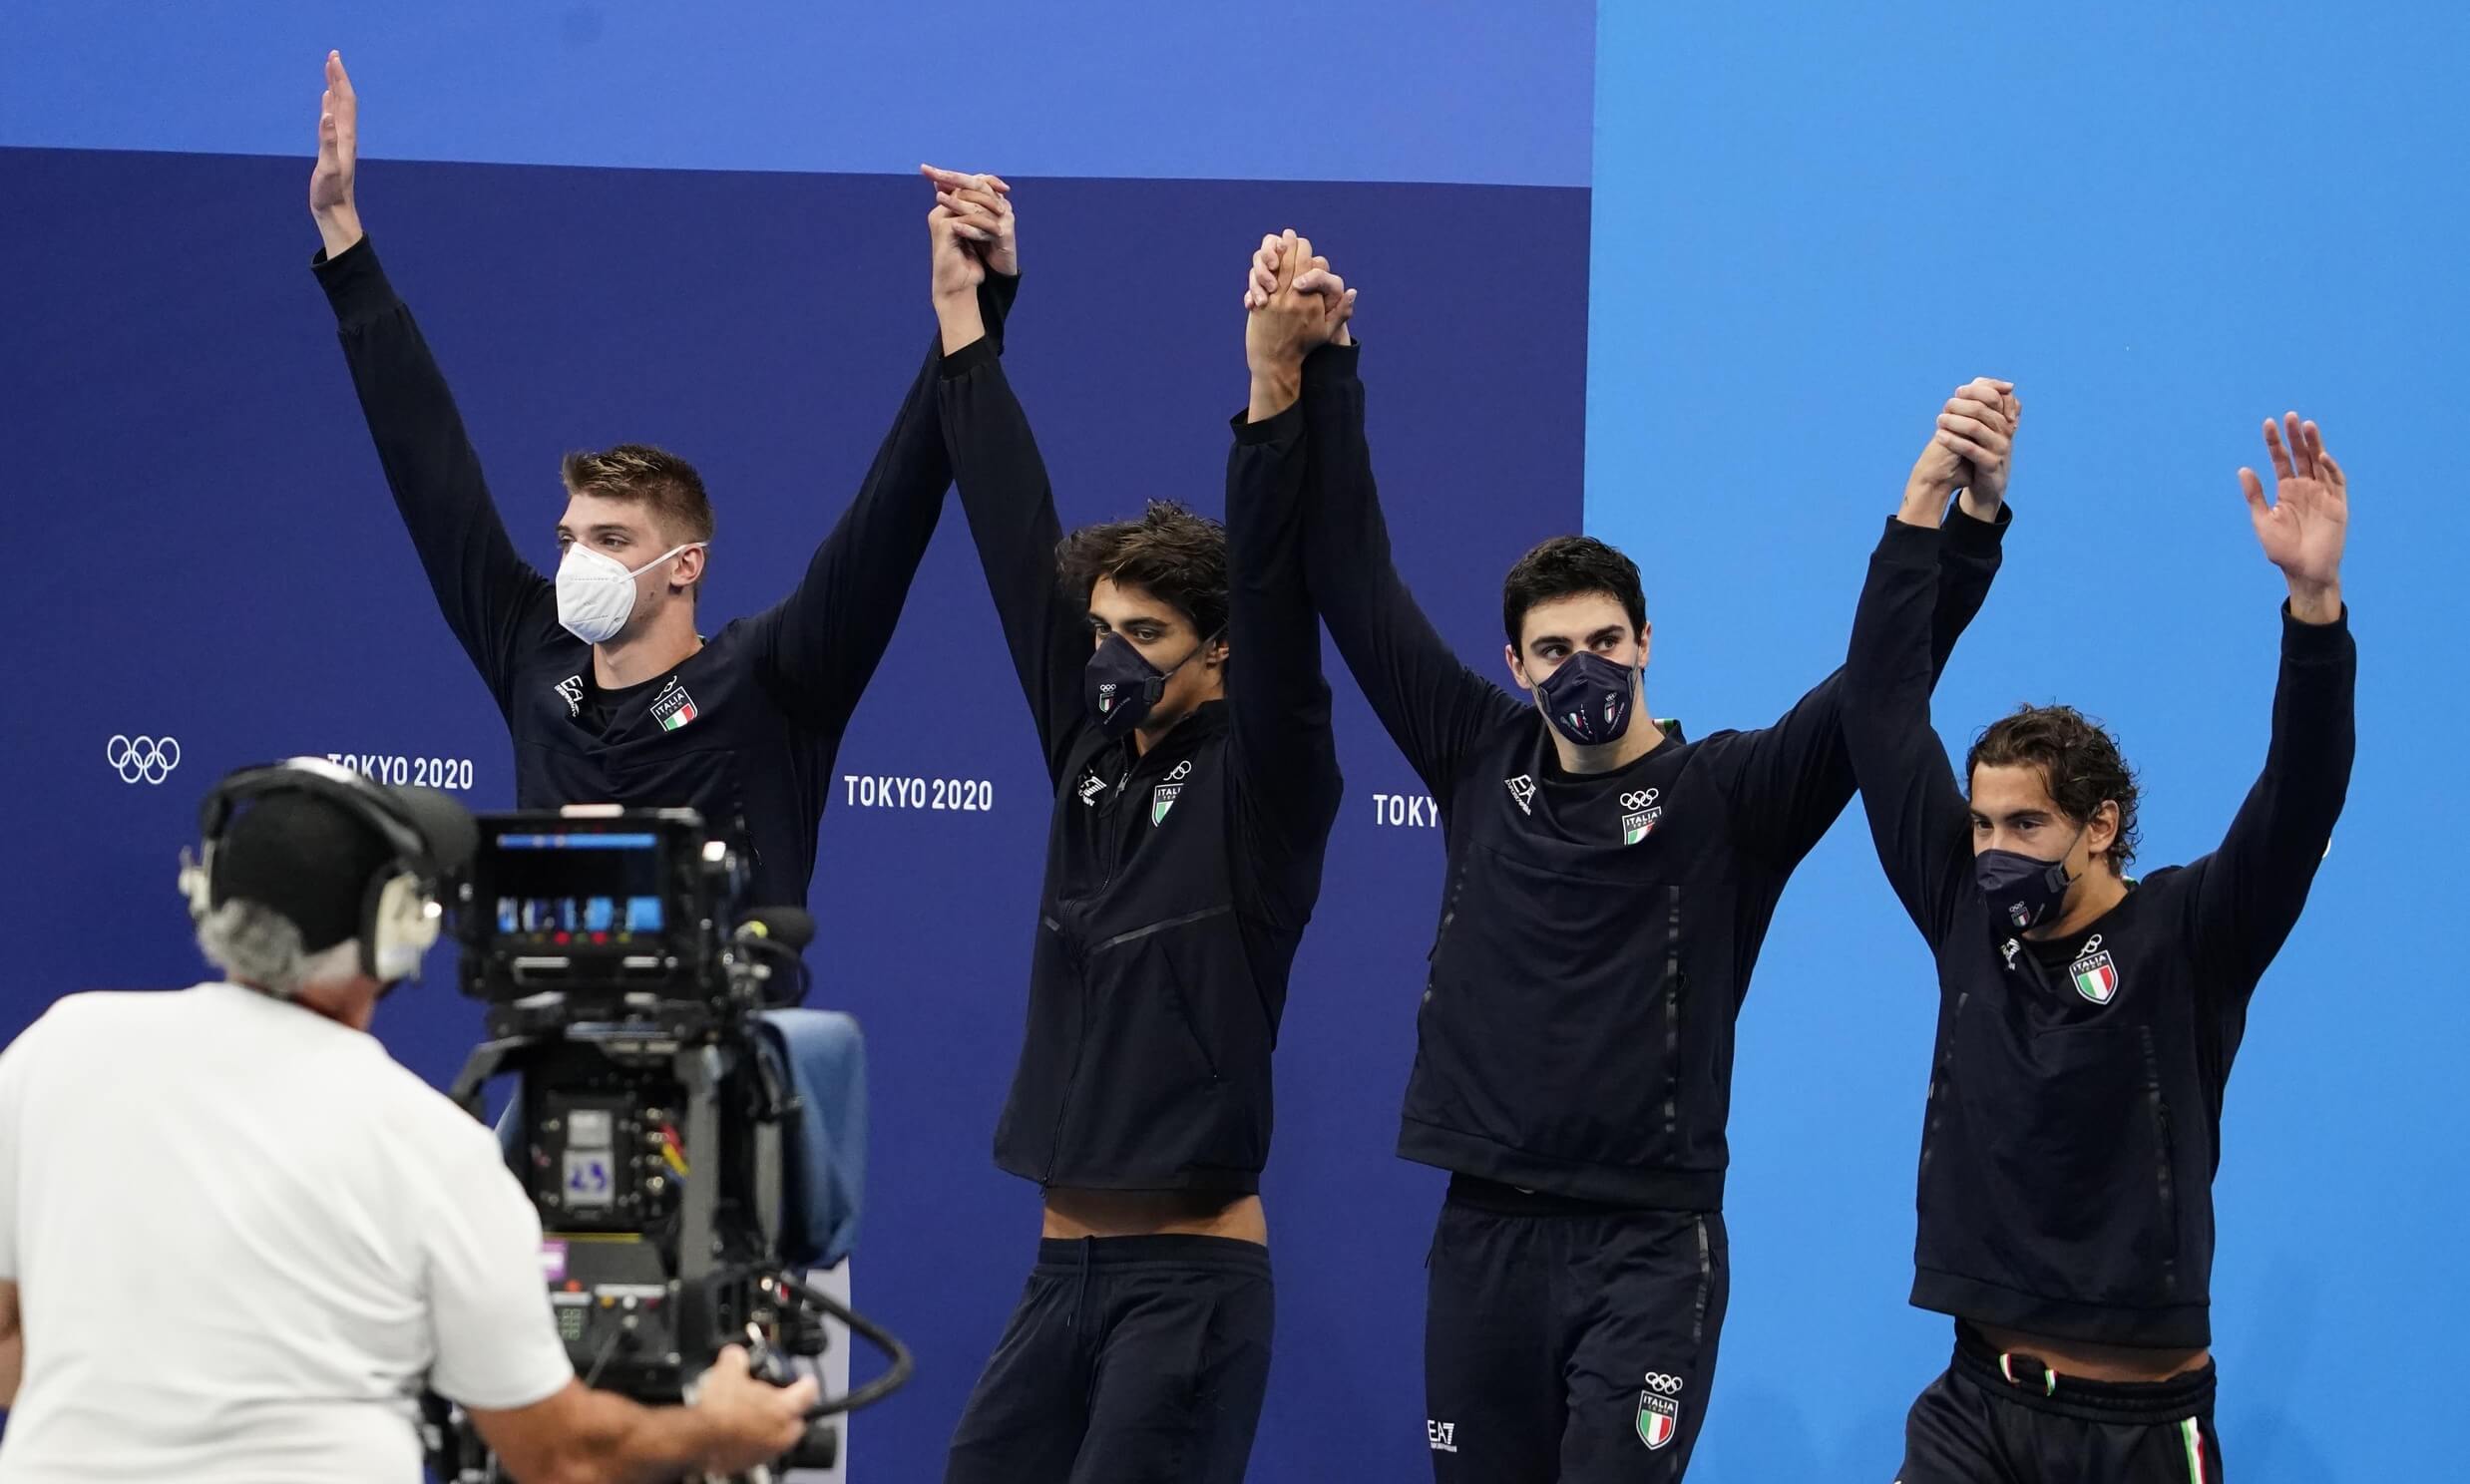 Jul 26, 2021; Tokyo, Japan; Italy relay team celebrates on the podium in the medals ceremony for the men's 4x100m freestyle relay during the Tokyo 2020 Olympic Summer Games at Tokyo Aquatics Centre. Mandatory Credit: Rob Schumacher-USA TODAY Sports